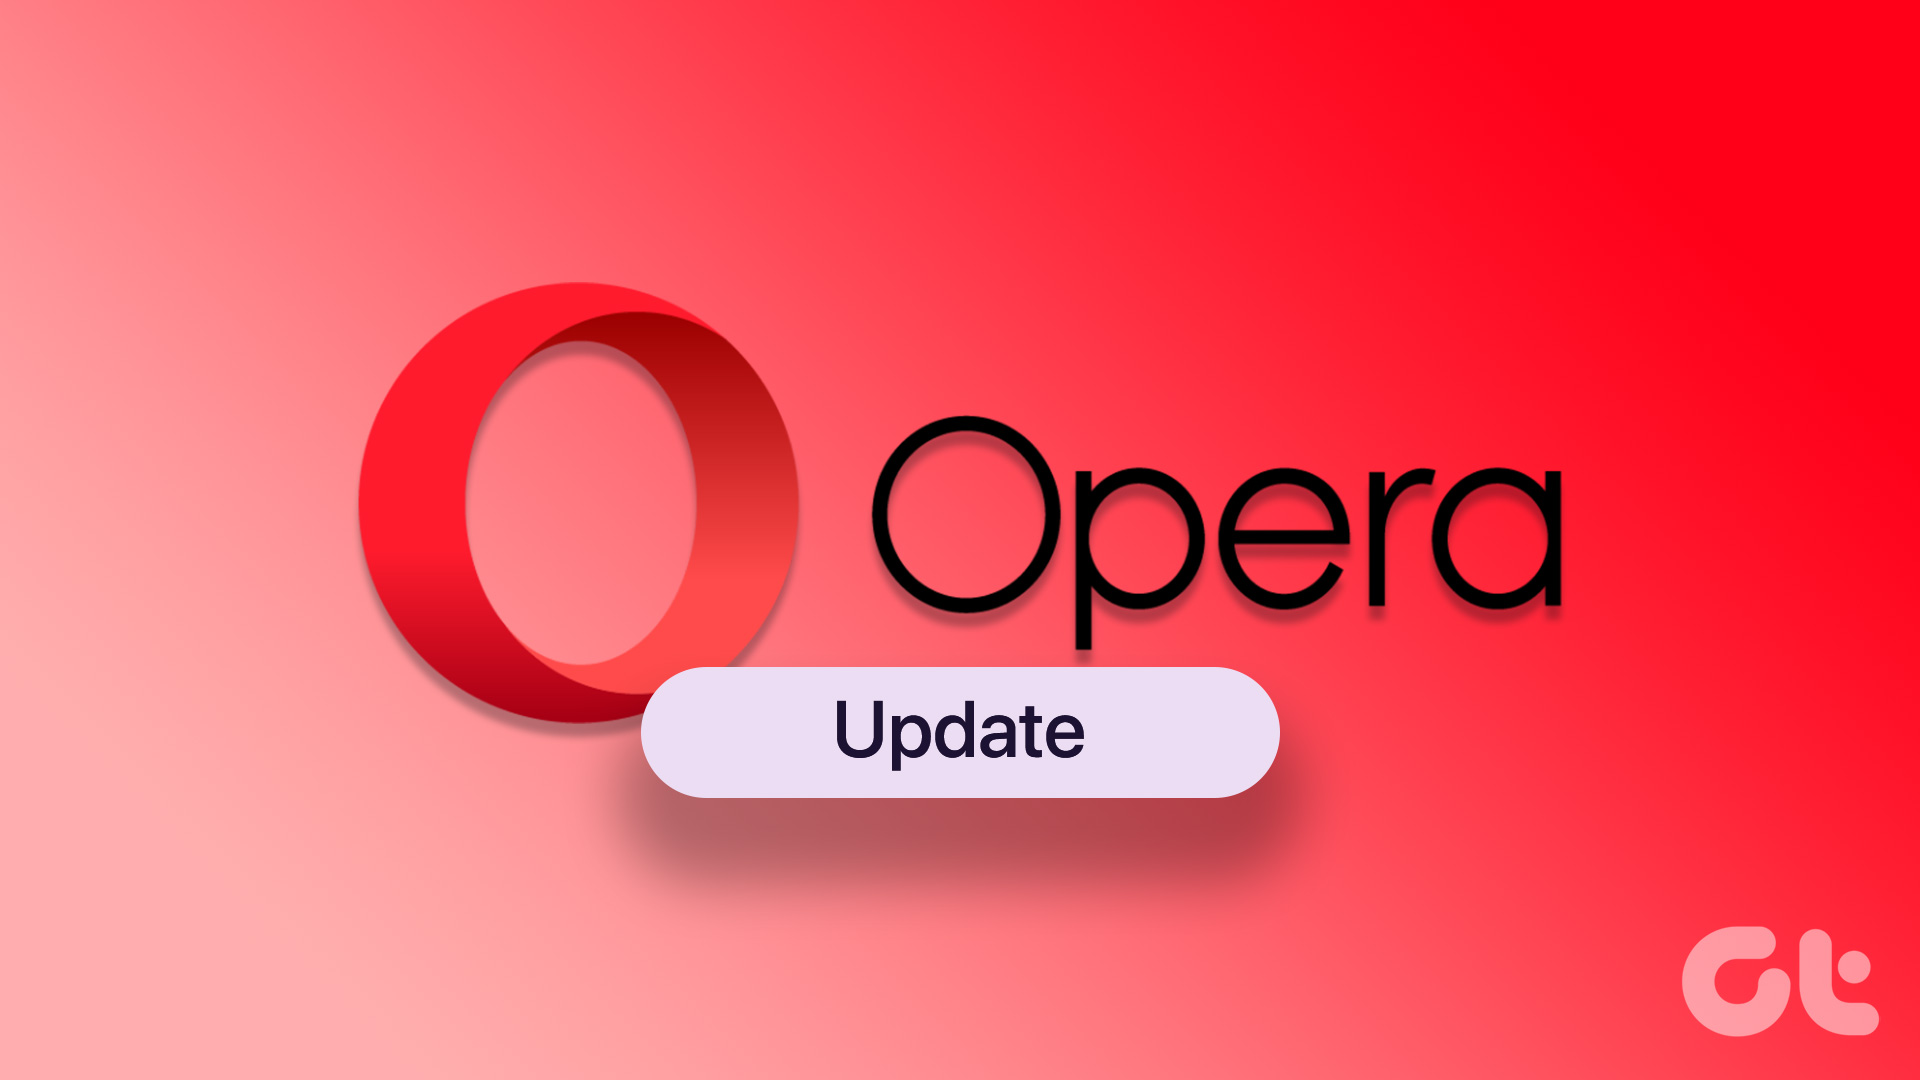 How to Update Opera Browser on Desktop and Mobile